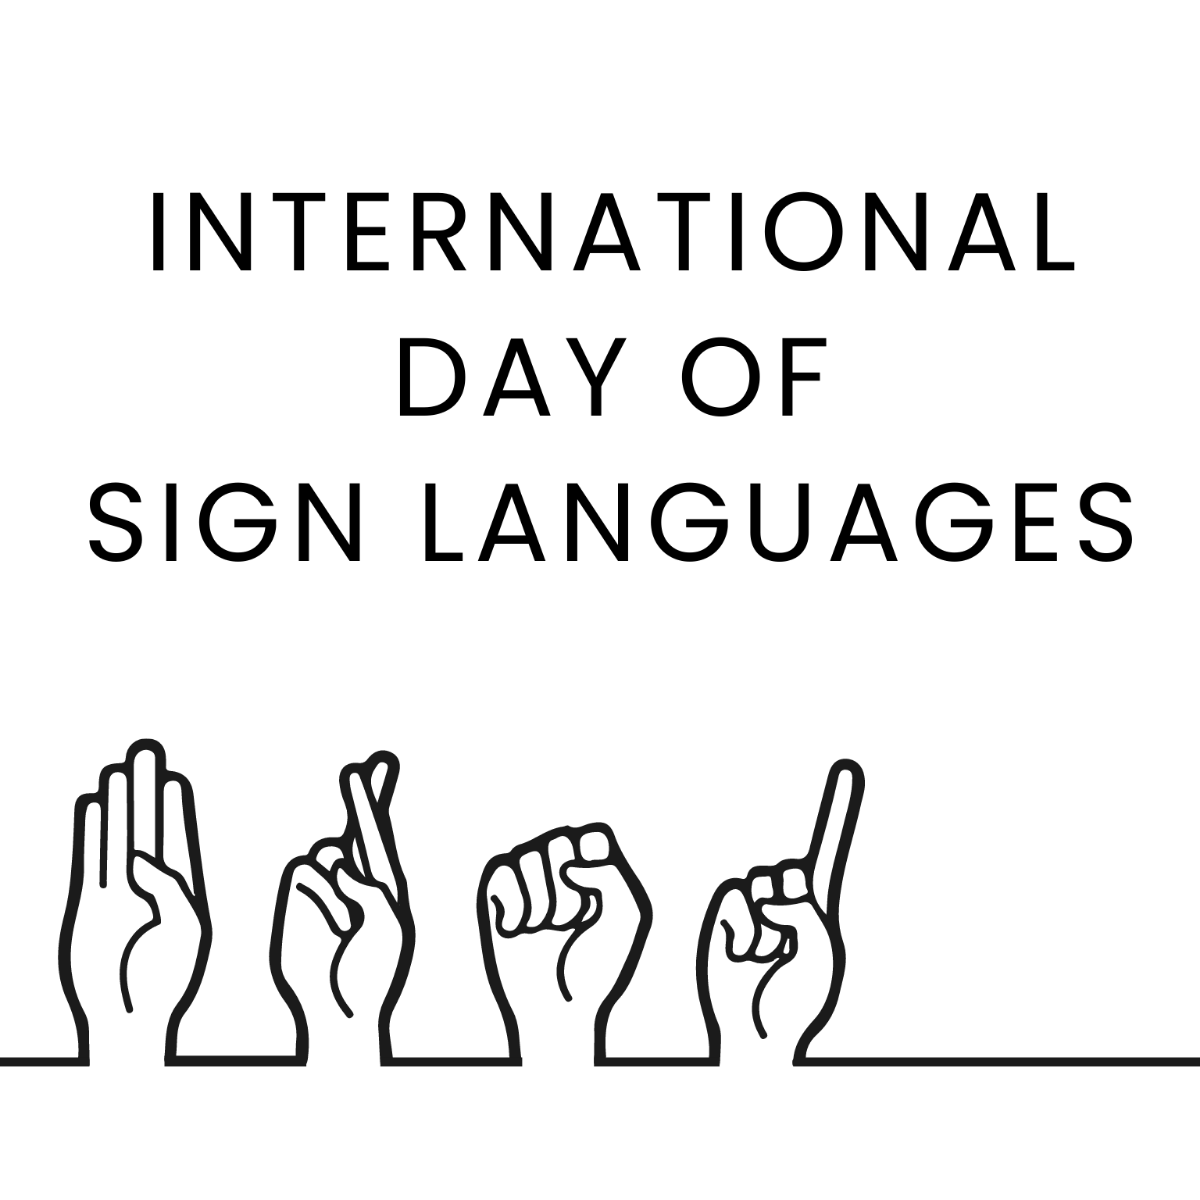 Free International Day of Sign Languages Cartoon Vector Template